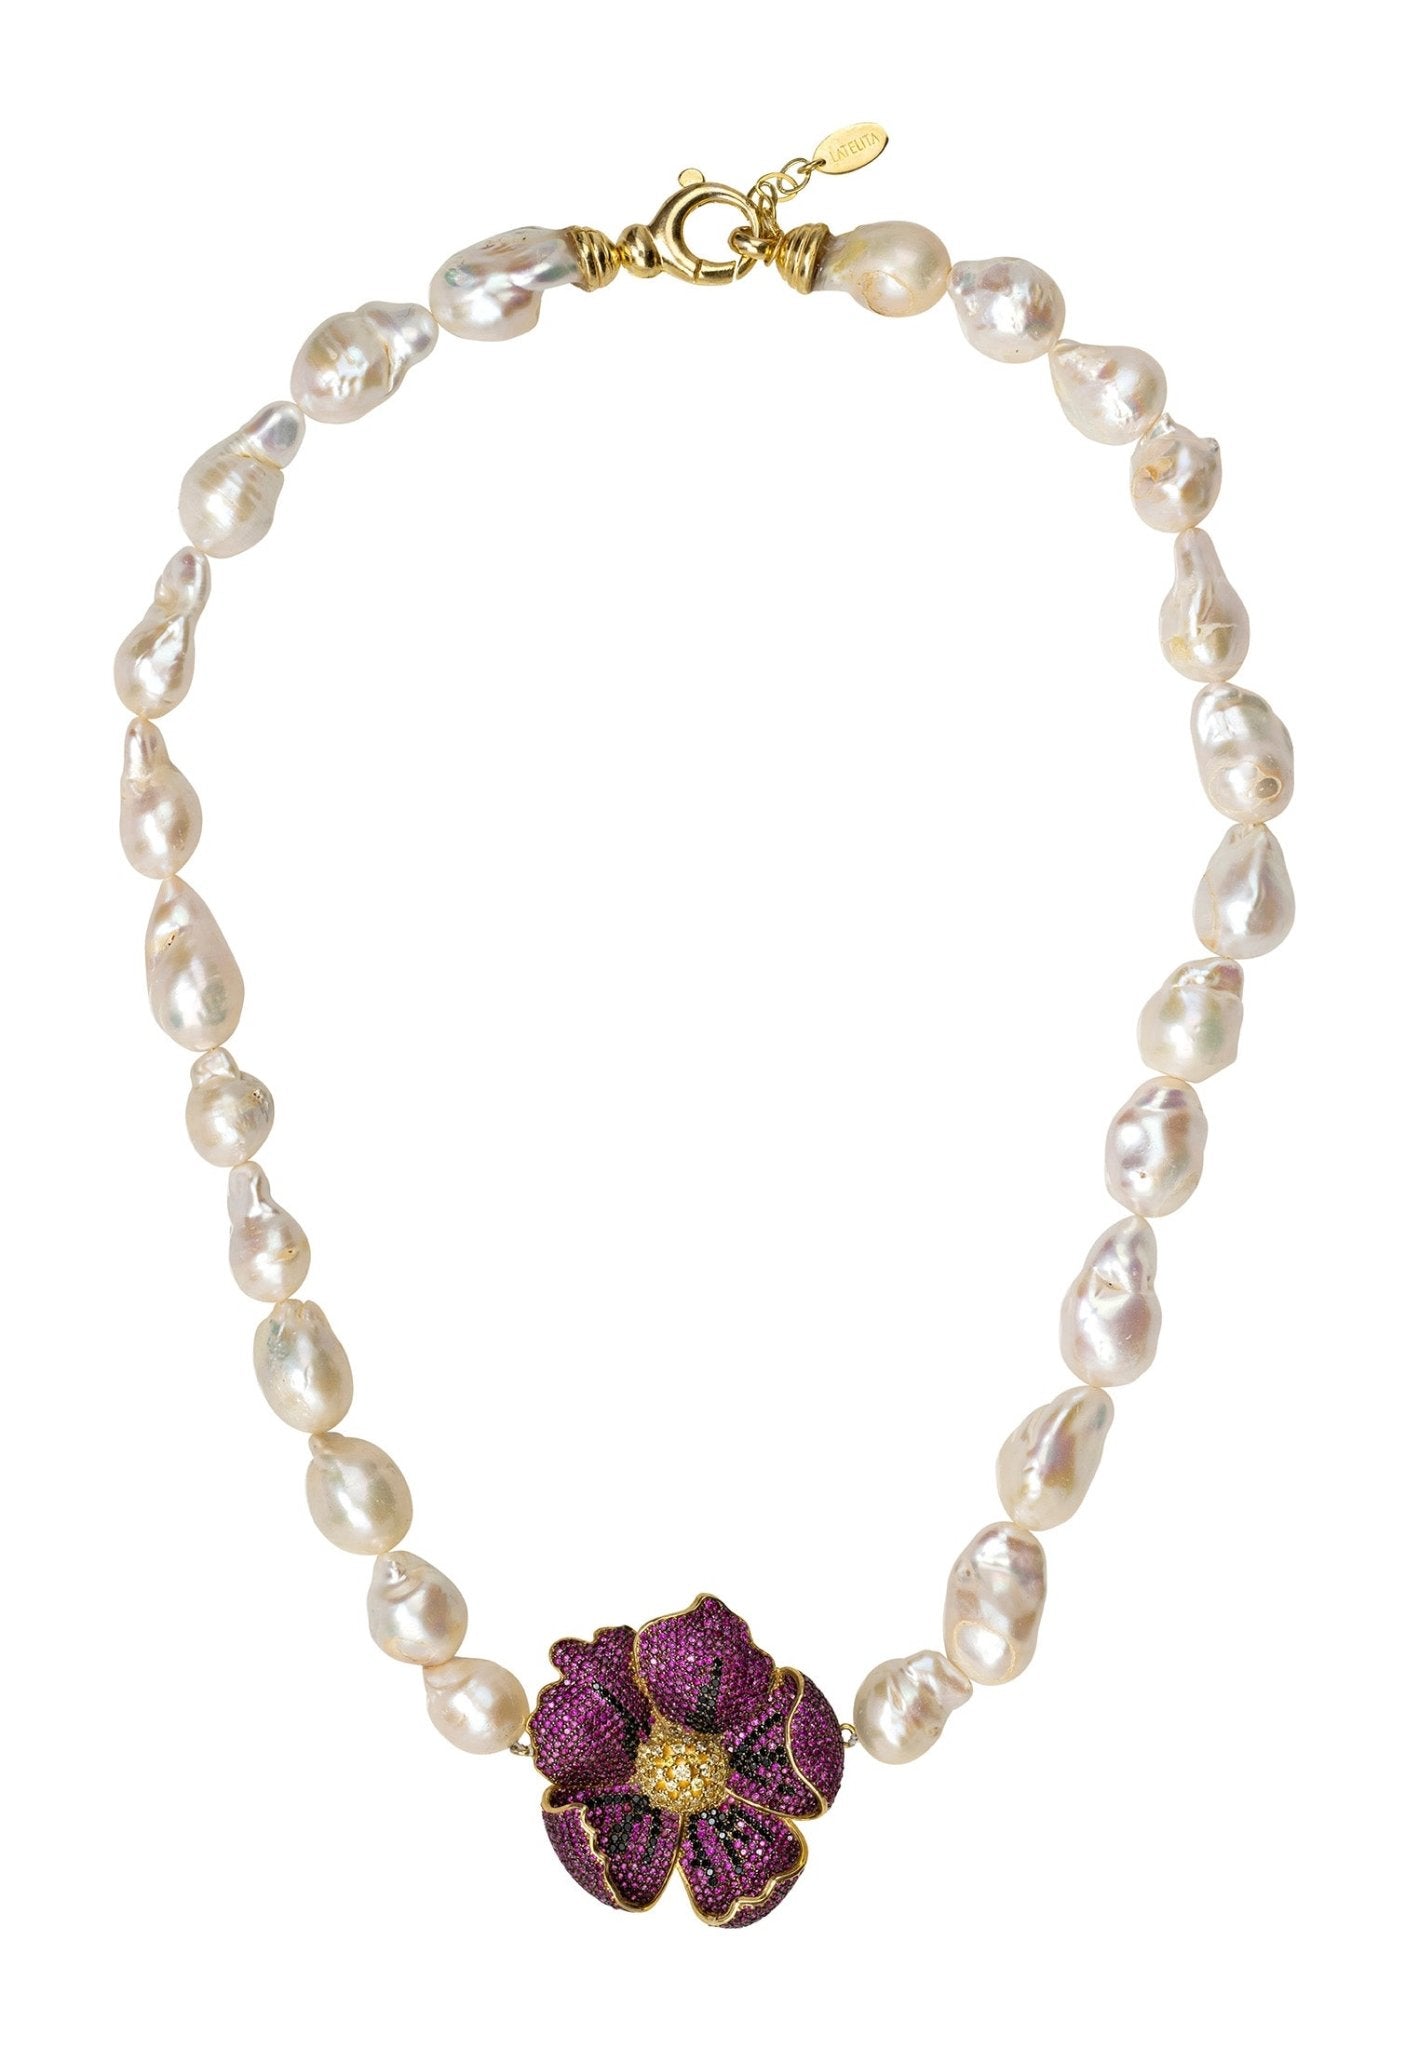 Poppy Flower Baroque Pearl Necklace Ruby Red Gold - LATELITA Necklaces